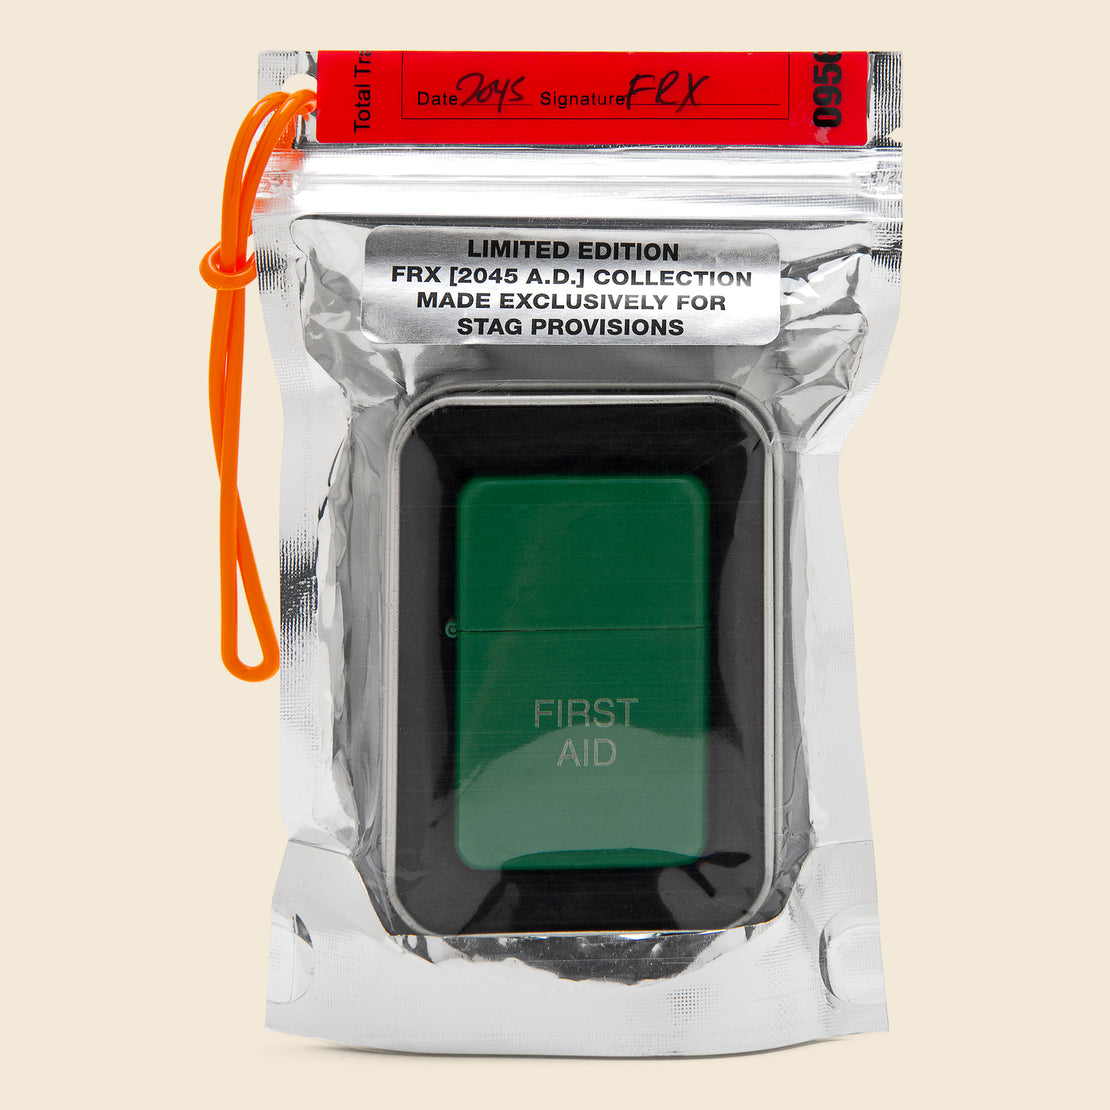 Field Rations Zippo Lighter - FIRST AID